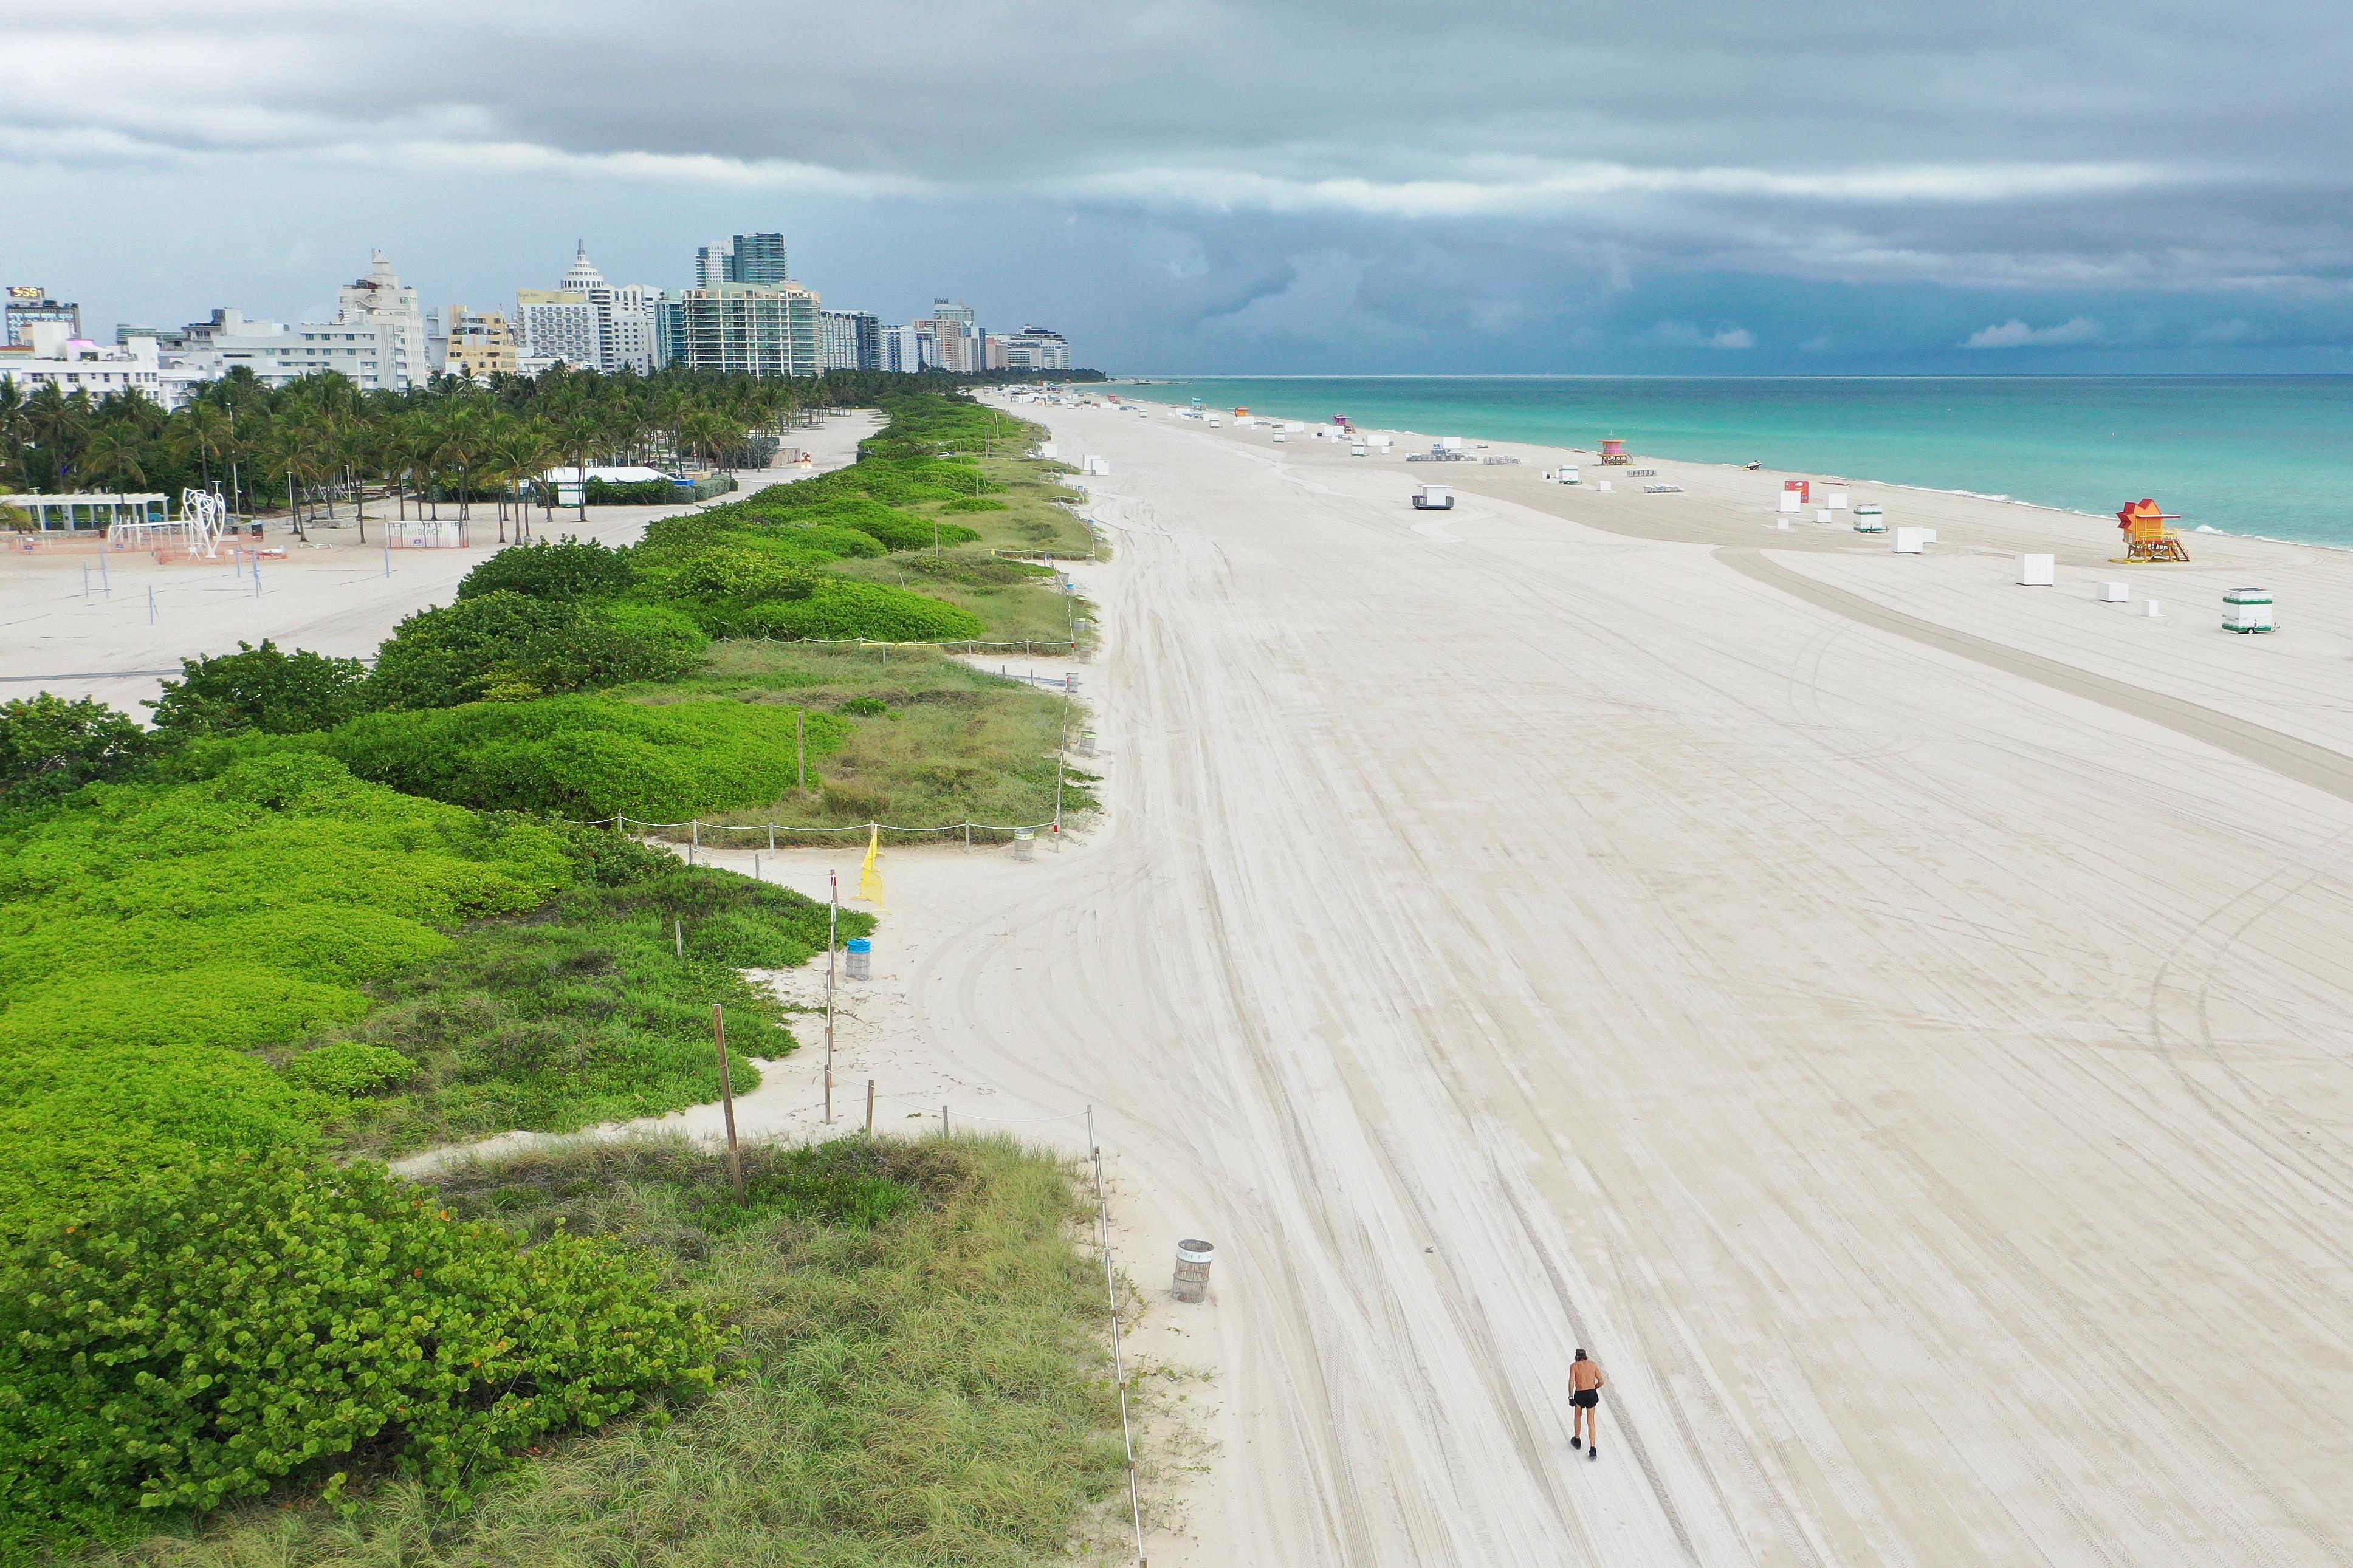 An aerial view of an empty beach, with the Miami skyline in the background.